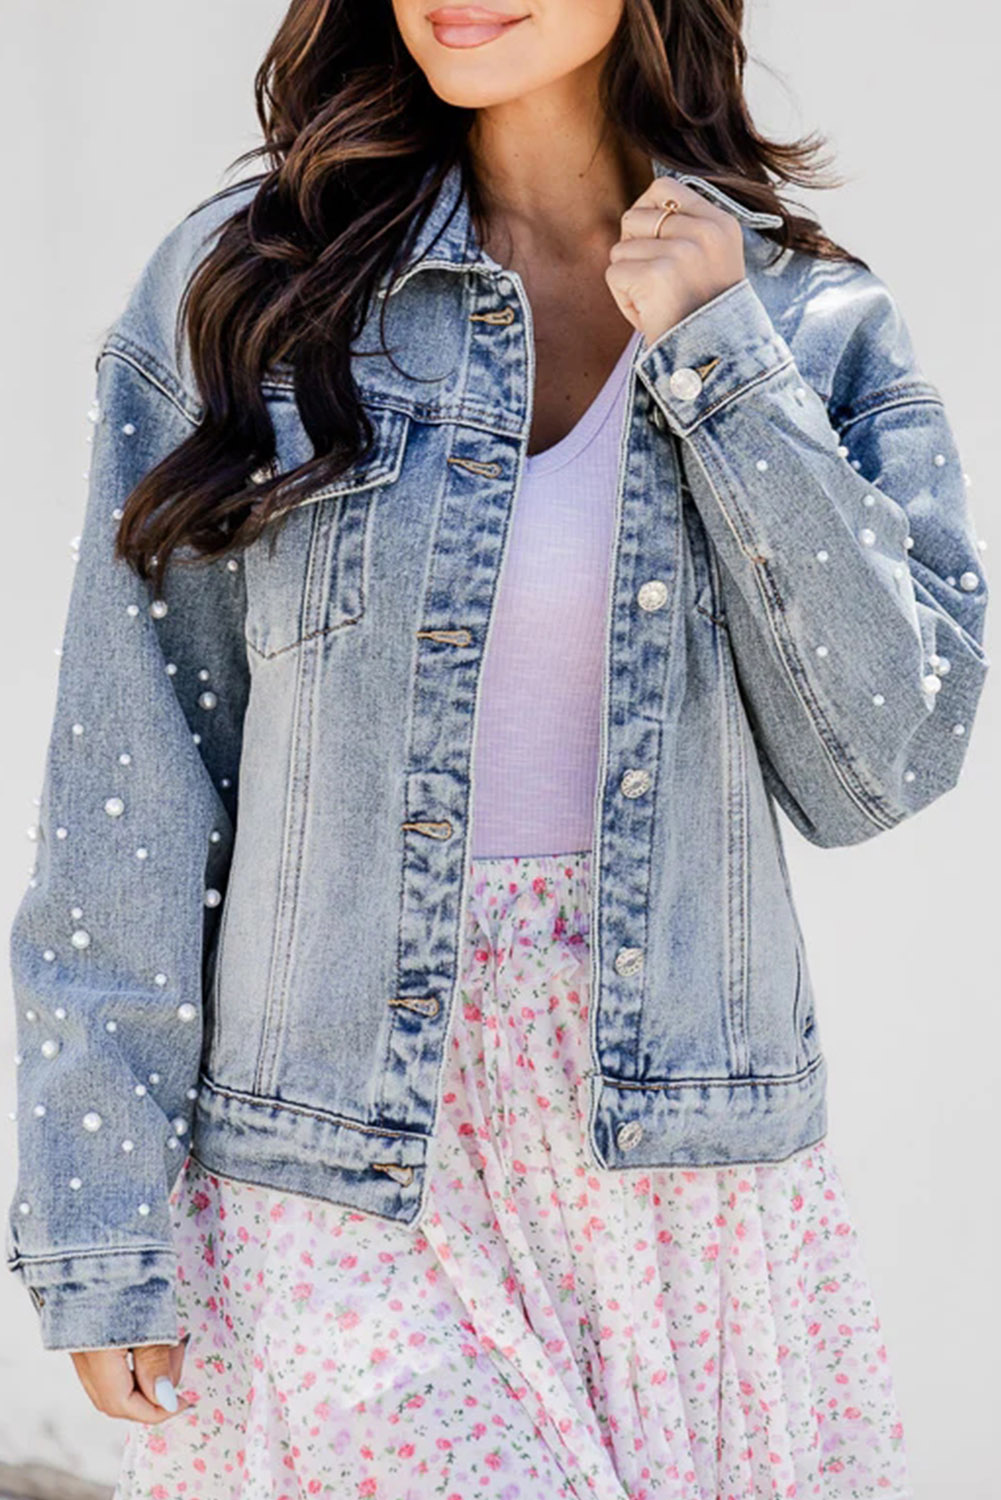 Shewin Wholesale High Quality Sky Blue Pearl Beaded Chest Pockets Buttoned Denim JACKET